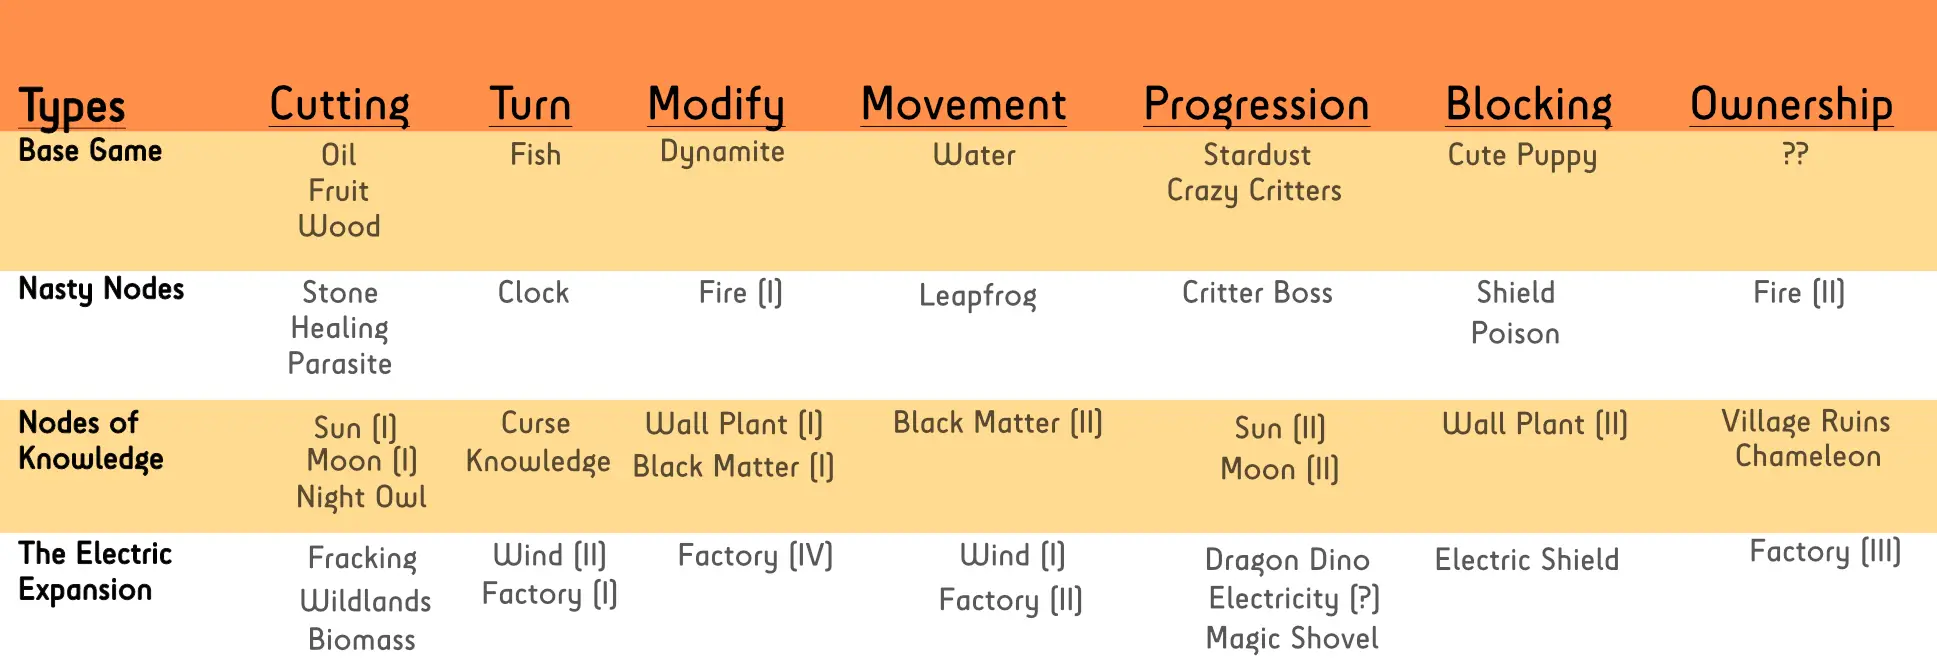 Diagram of Action Types